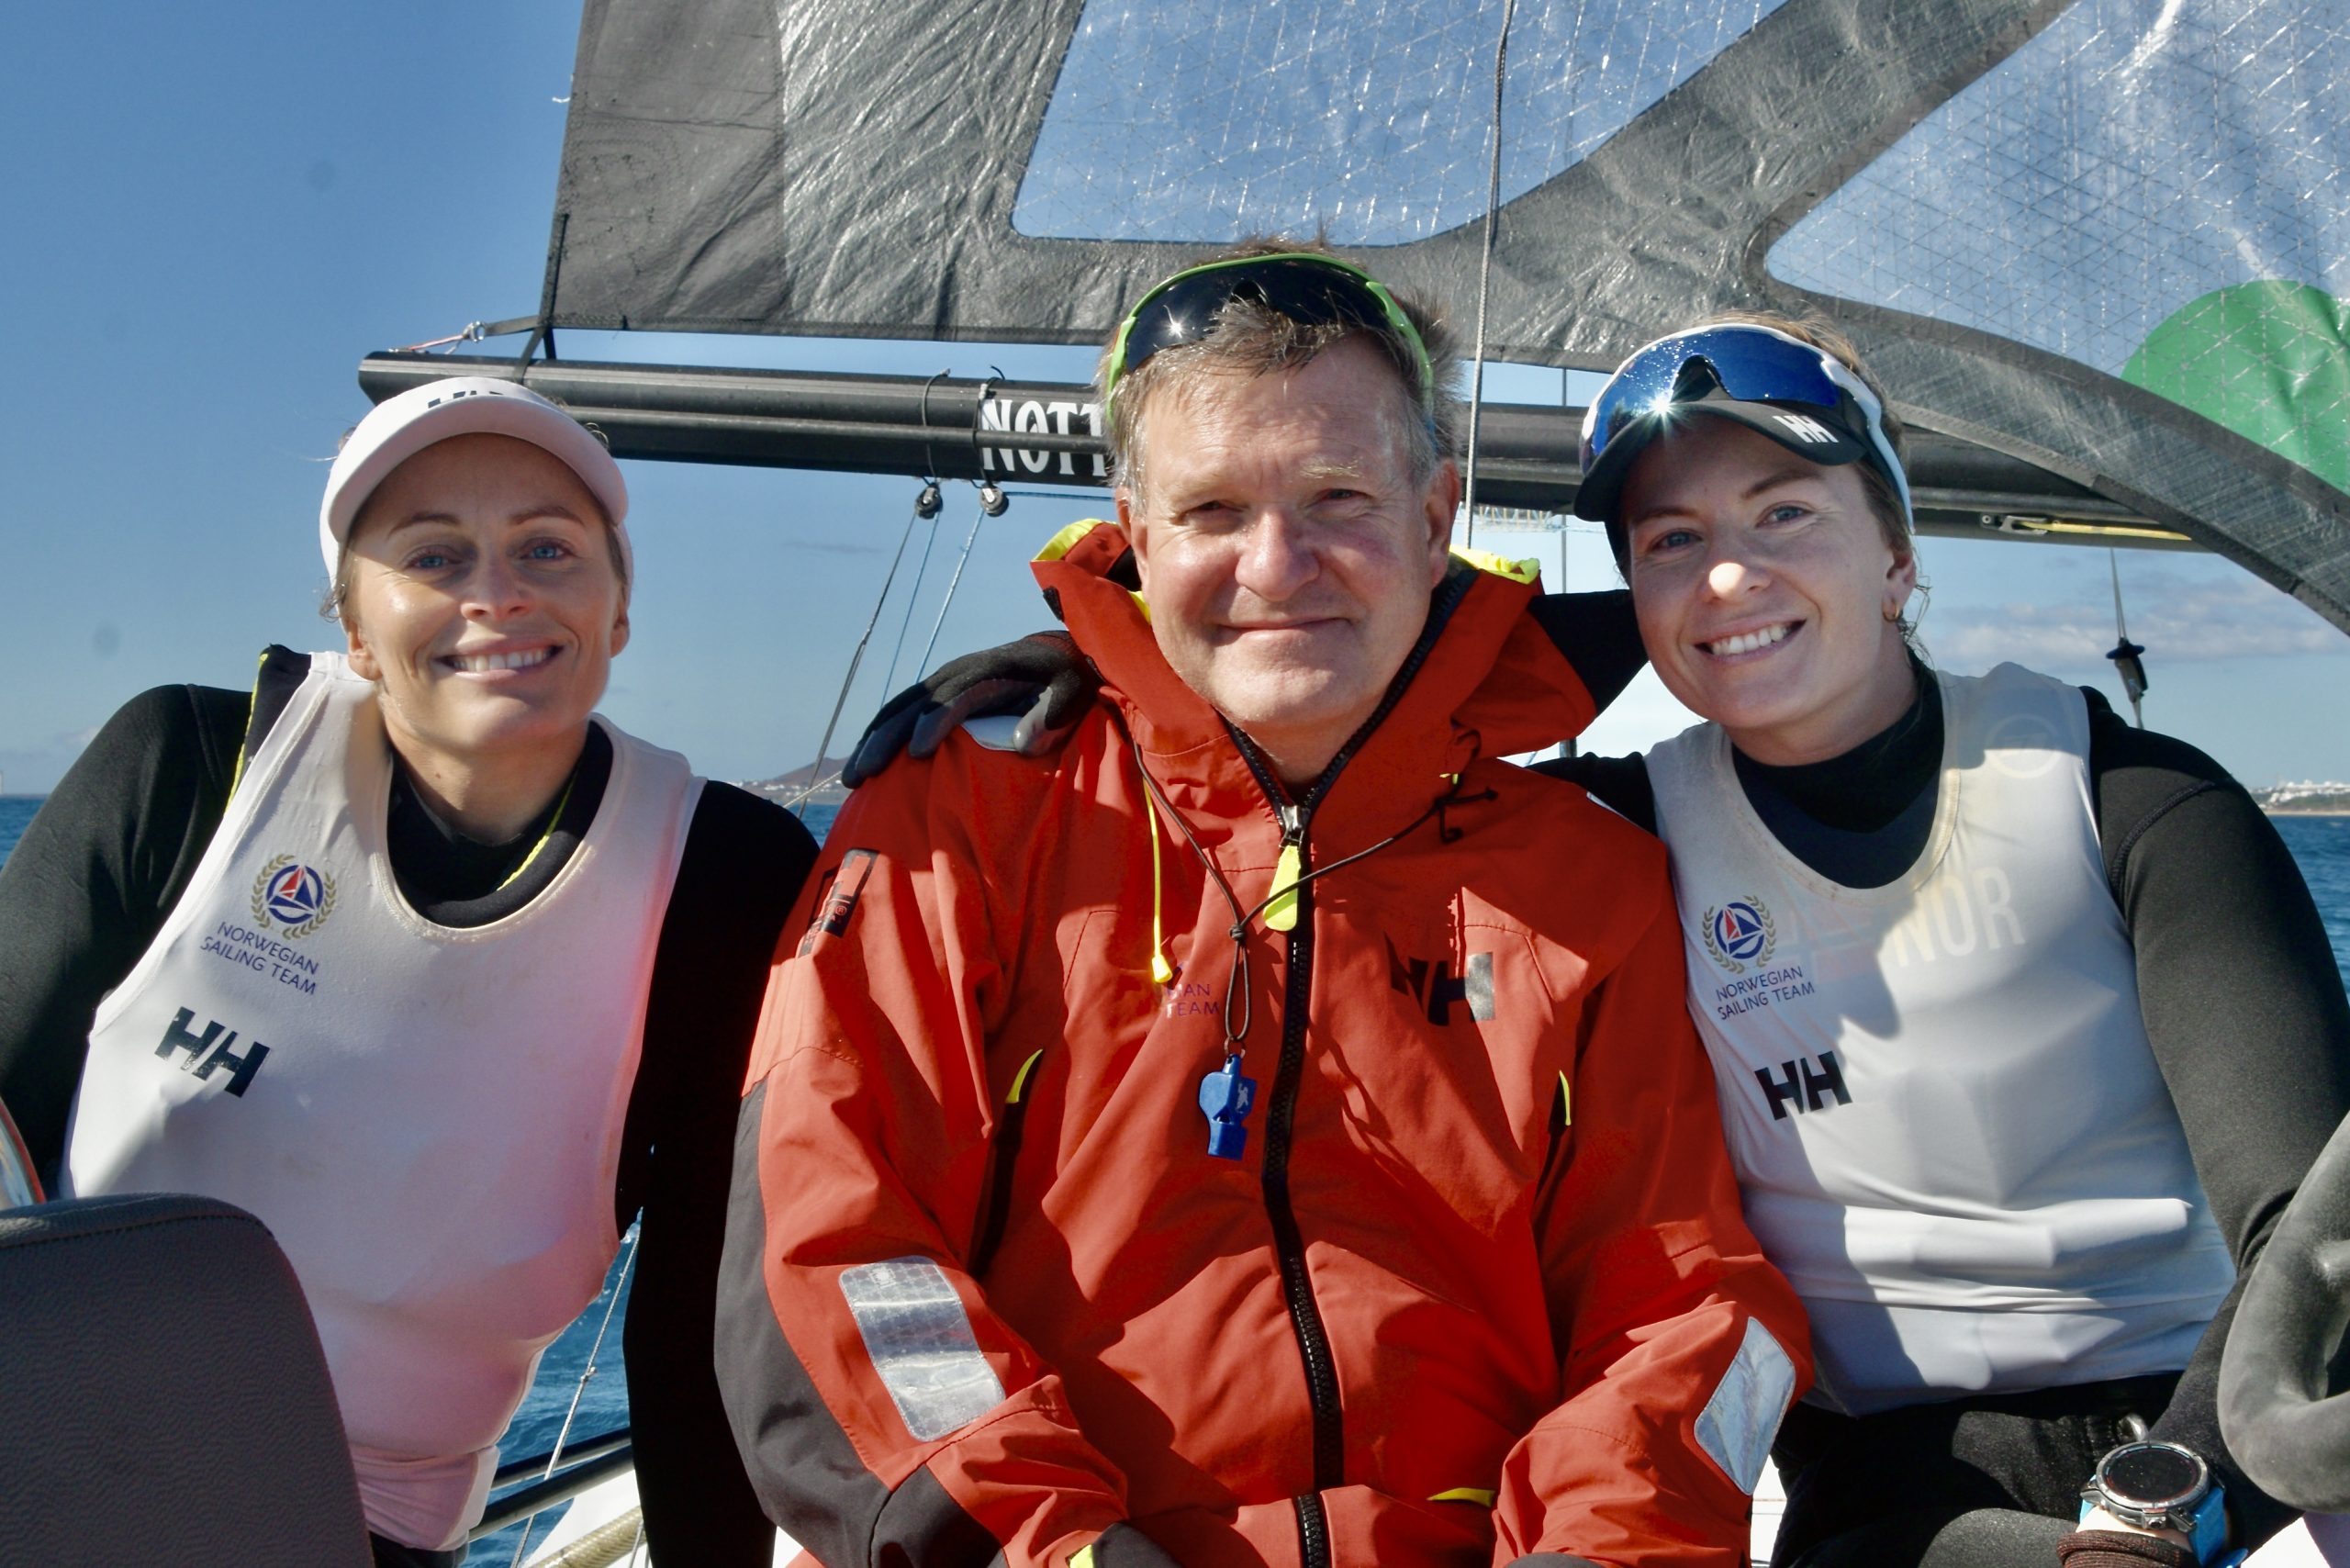 Helene, Marie, European Champions, and Norwegian coach on a training day in Lanzarote, leading up to the World Championship